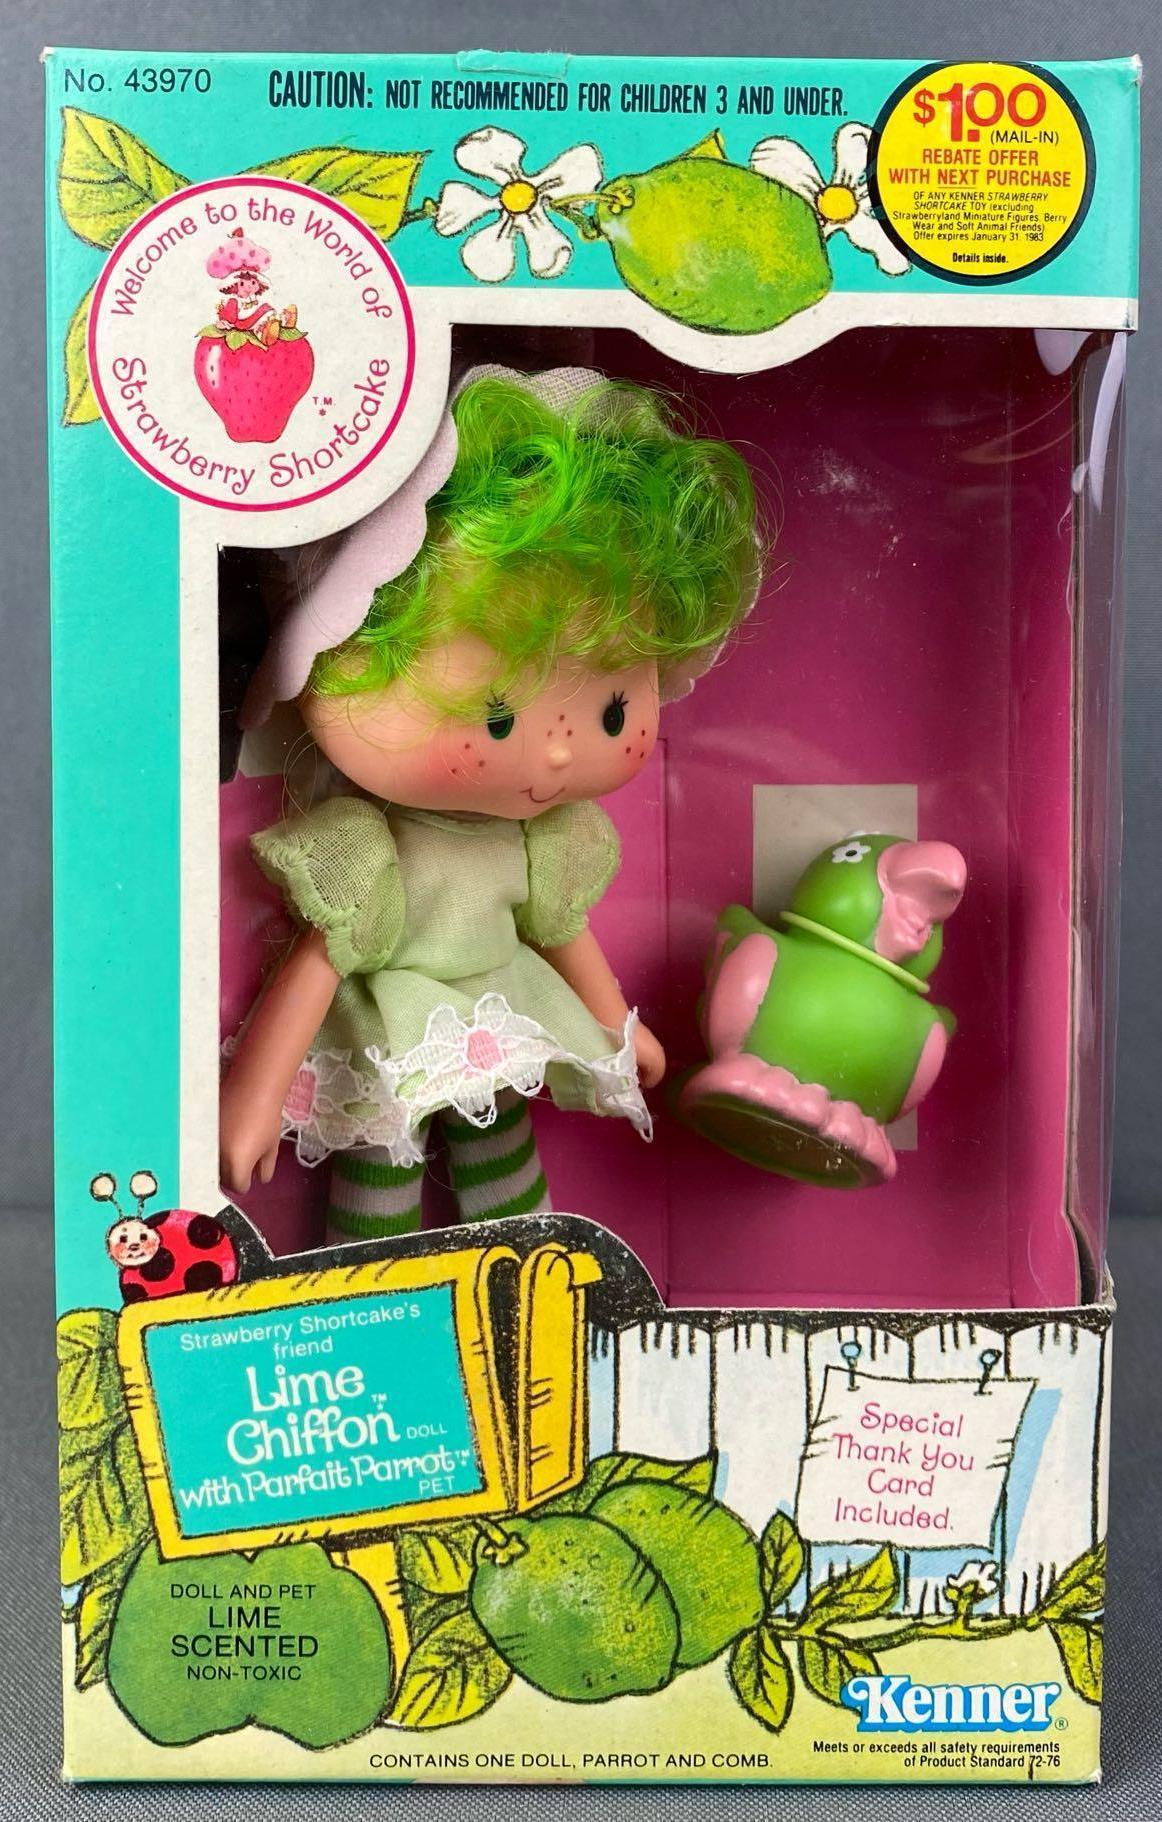 Kenner Strawberry Shortcake Lime Chiffon Doll with Parfait Parrot Pet